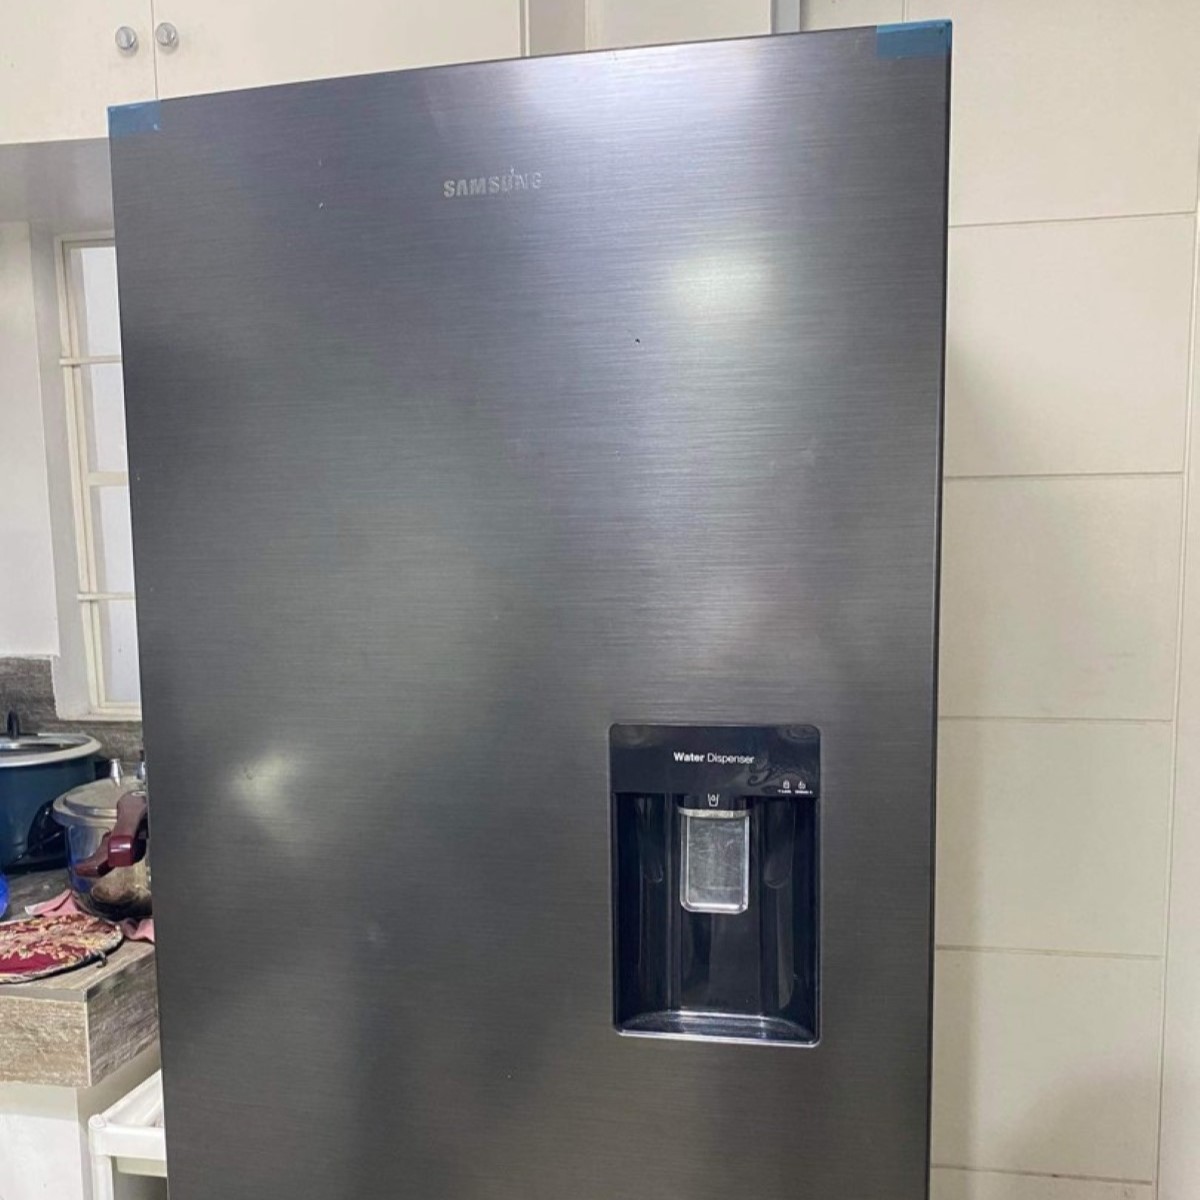 How To Clean Samsung Water Dispenser